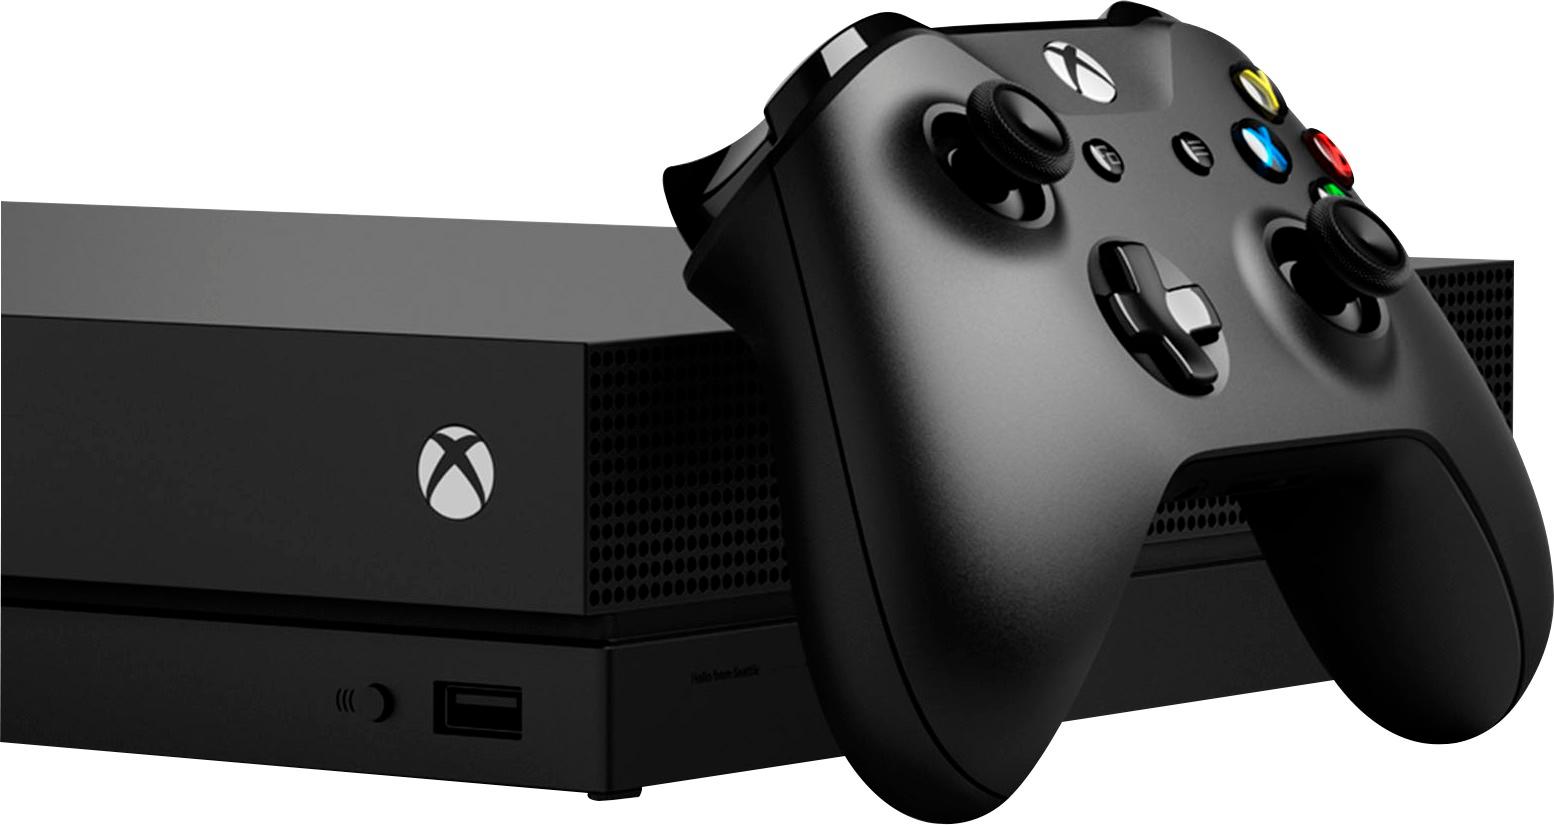 Black Microsoft Xbox One X 1TB Solid State Drive Gaming Console with Wirless Controller Renewed Enhanced by Scorpio CPU and Fast SSD HDR Native 4K 